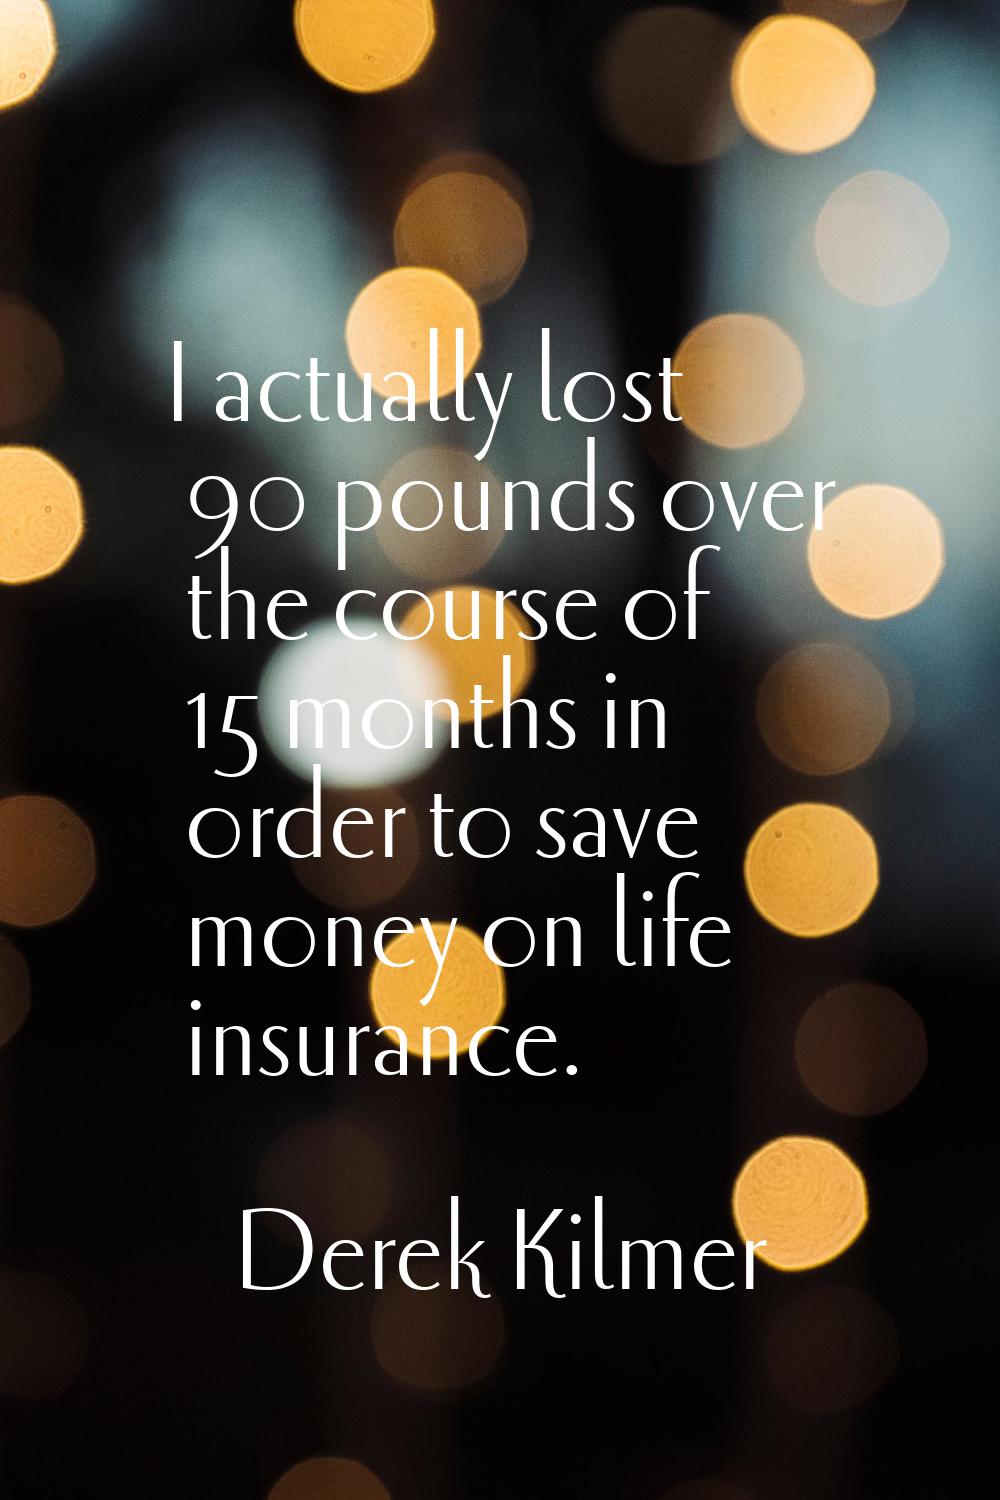 I actually lost 90 pounds over the course of 15 months in order to save money on life insurance.